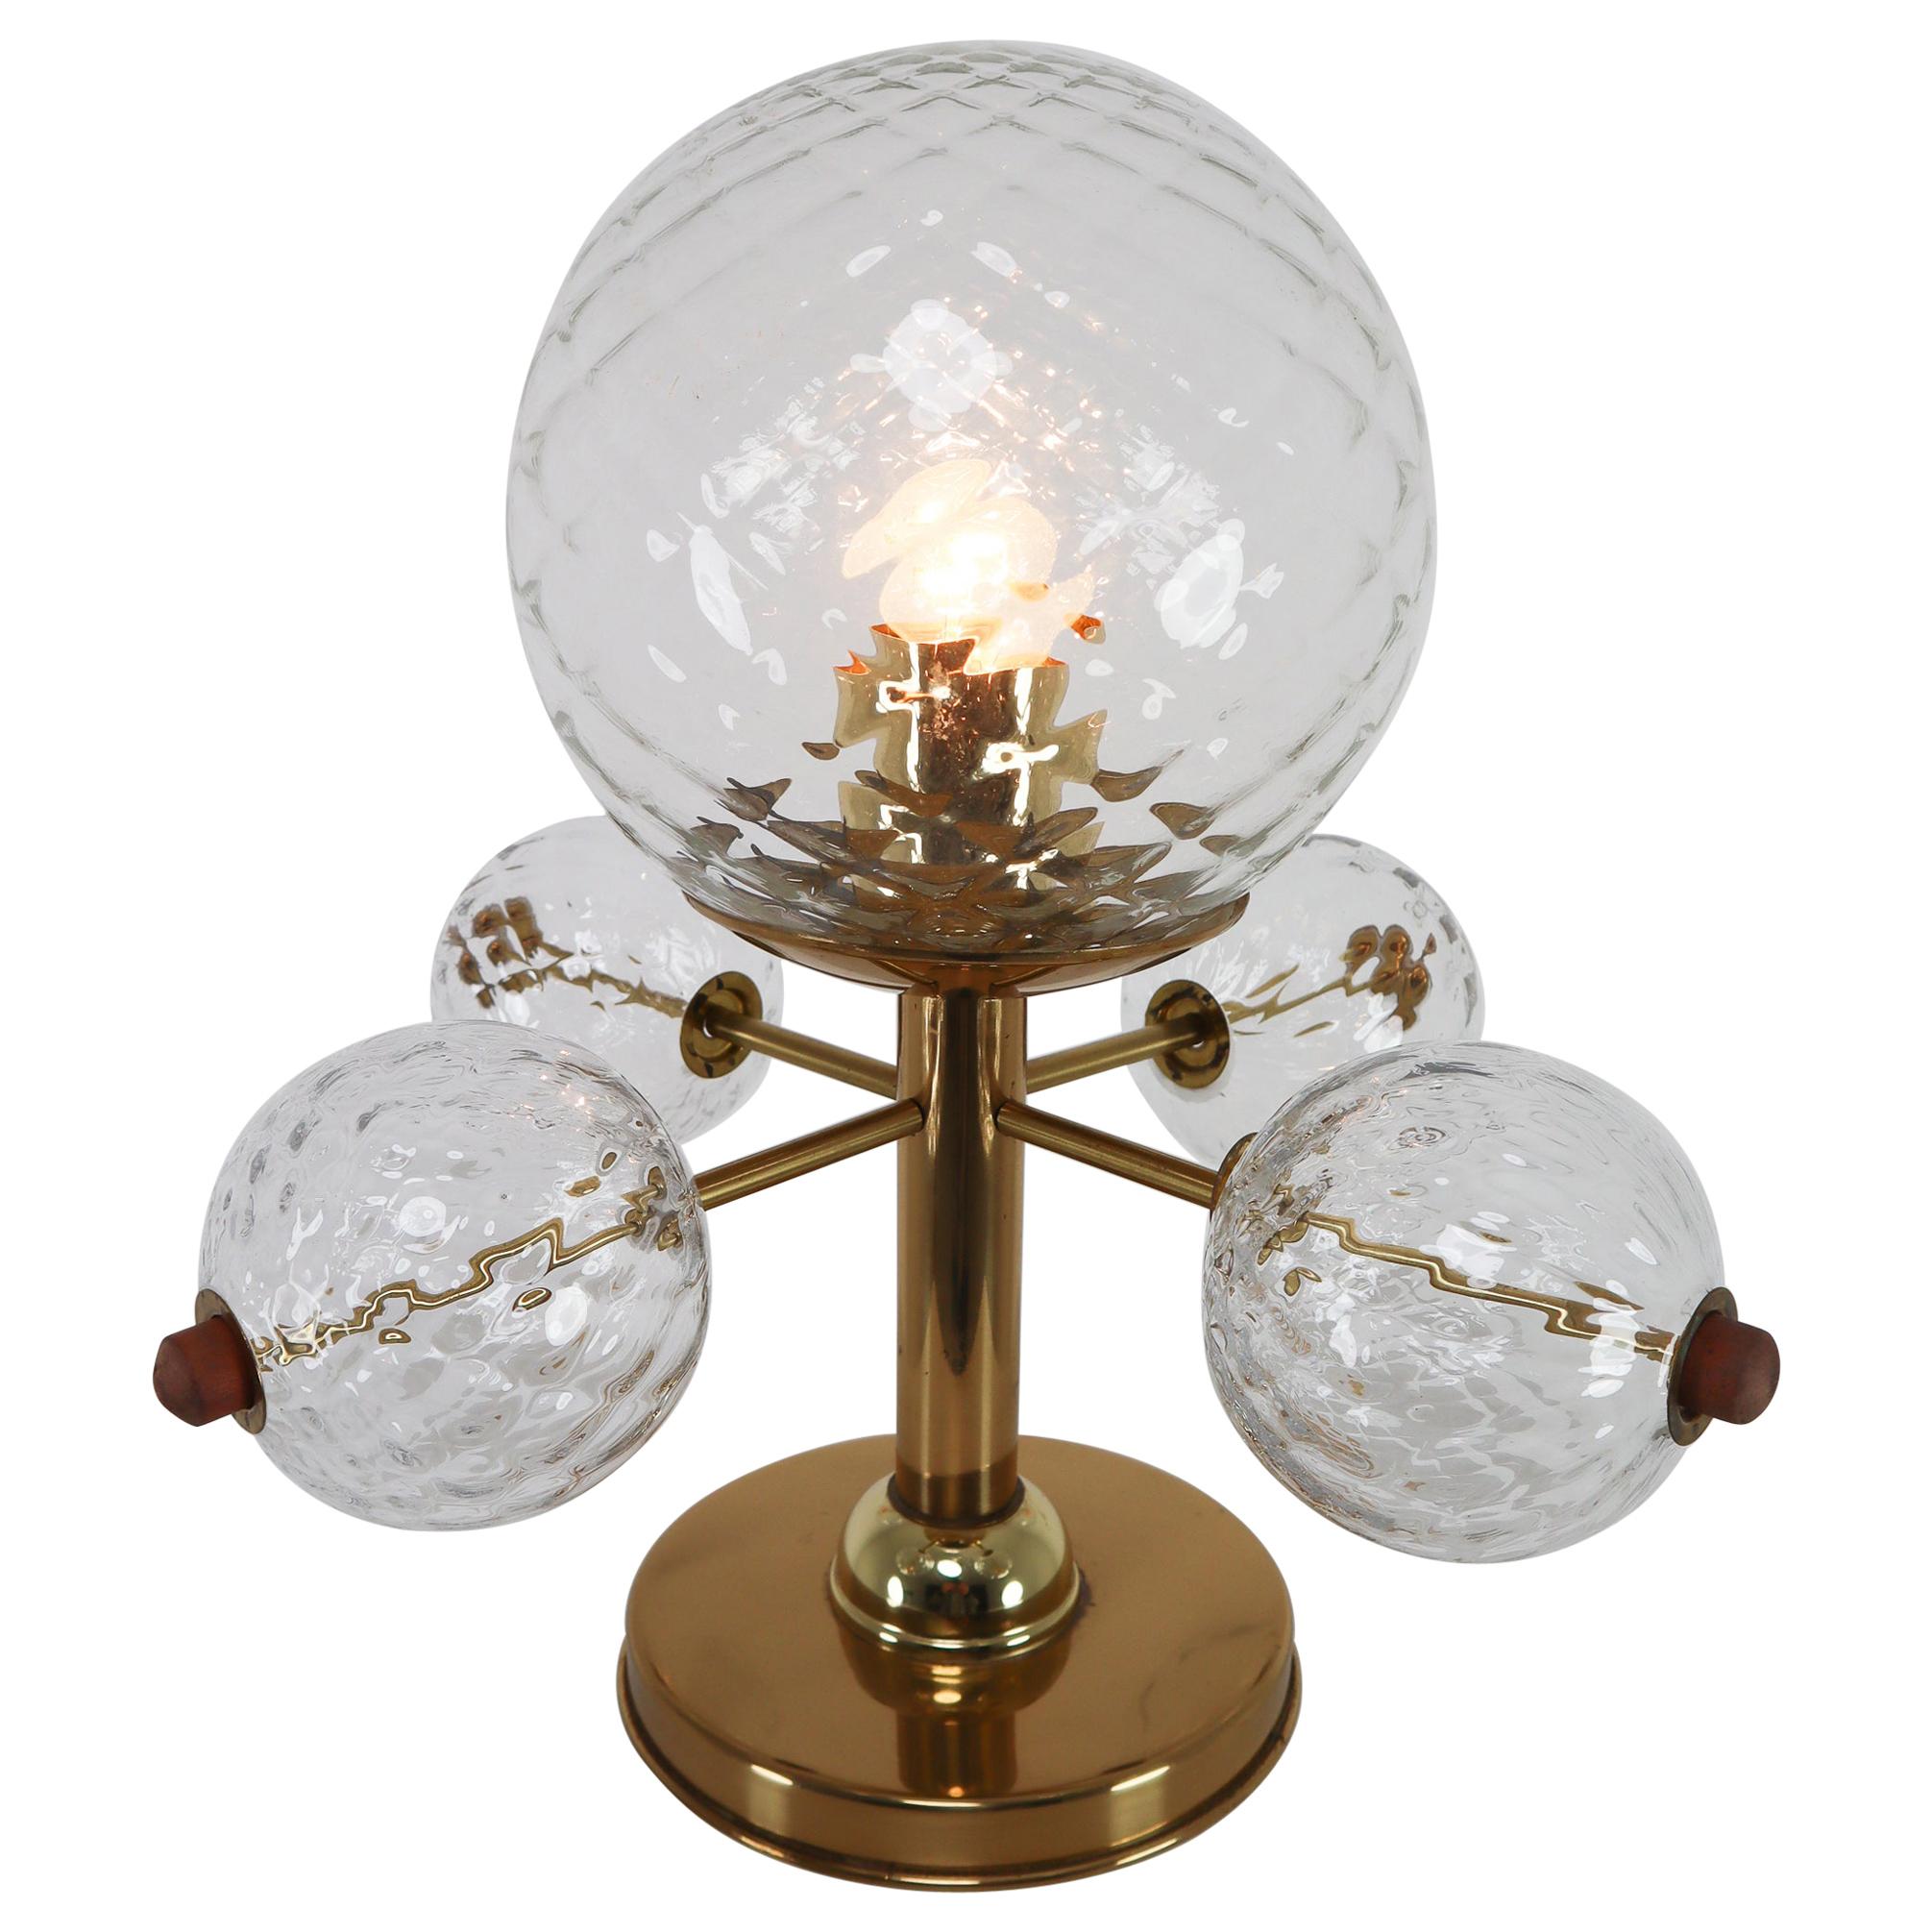 Midcentury Table Lamp with Brass Fixture and Structured Glass, Europe, 1970s